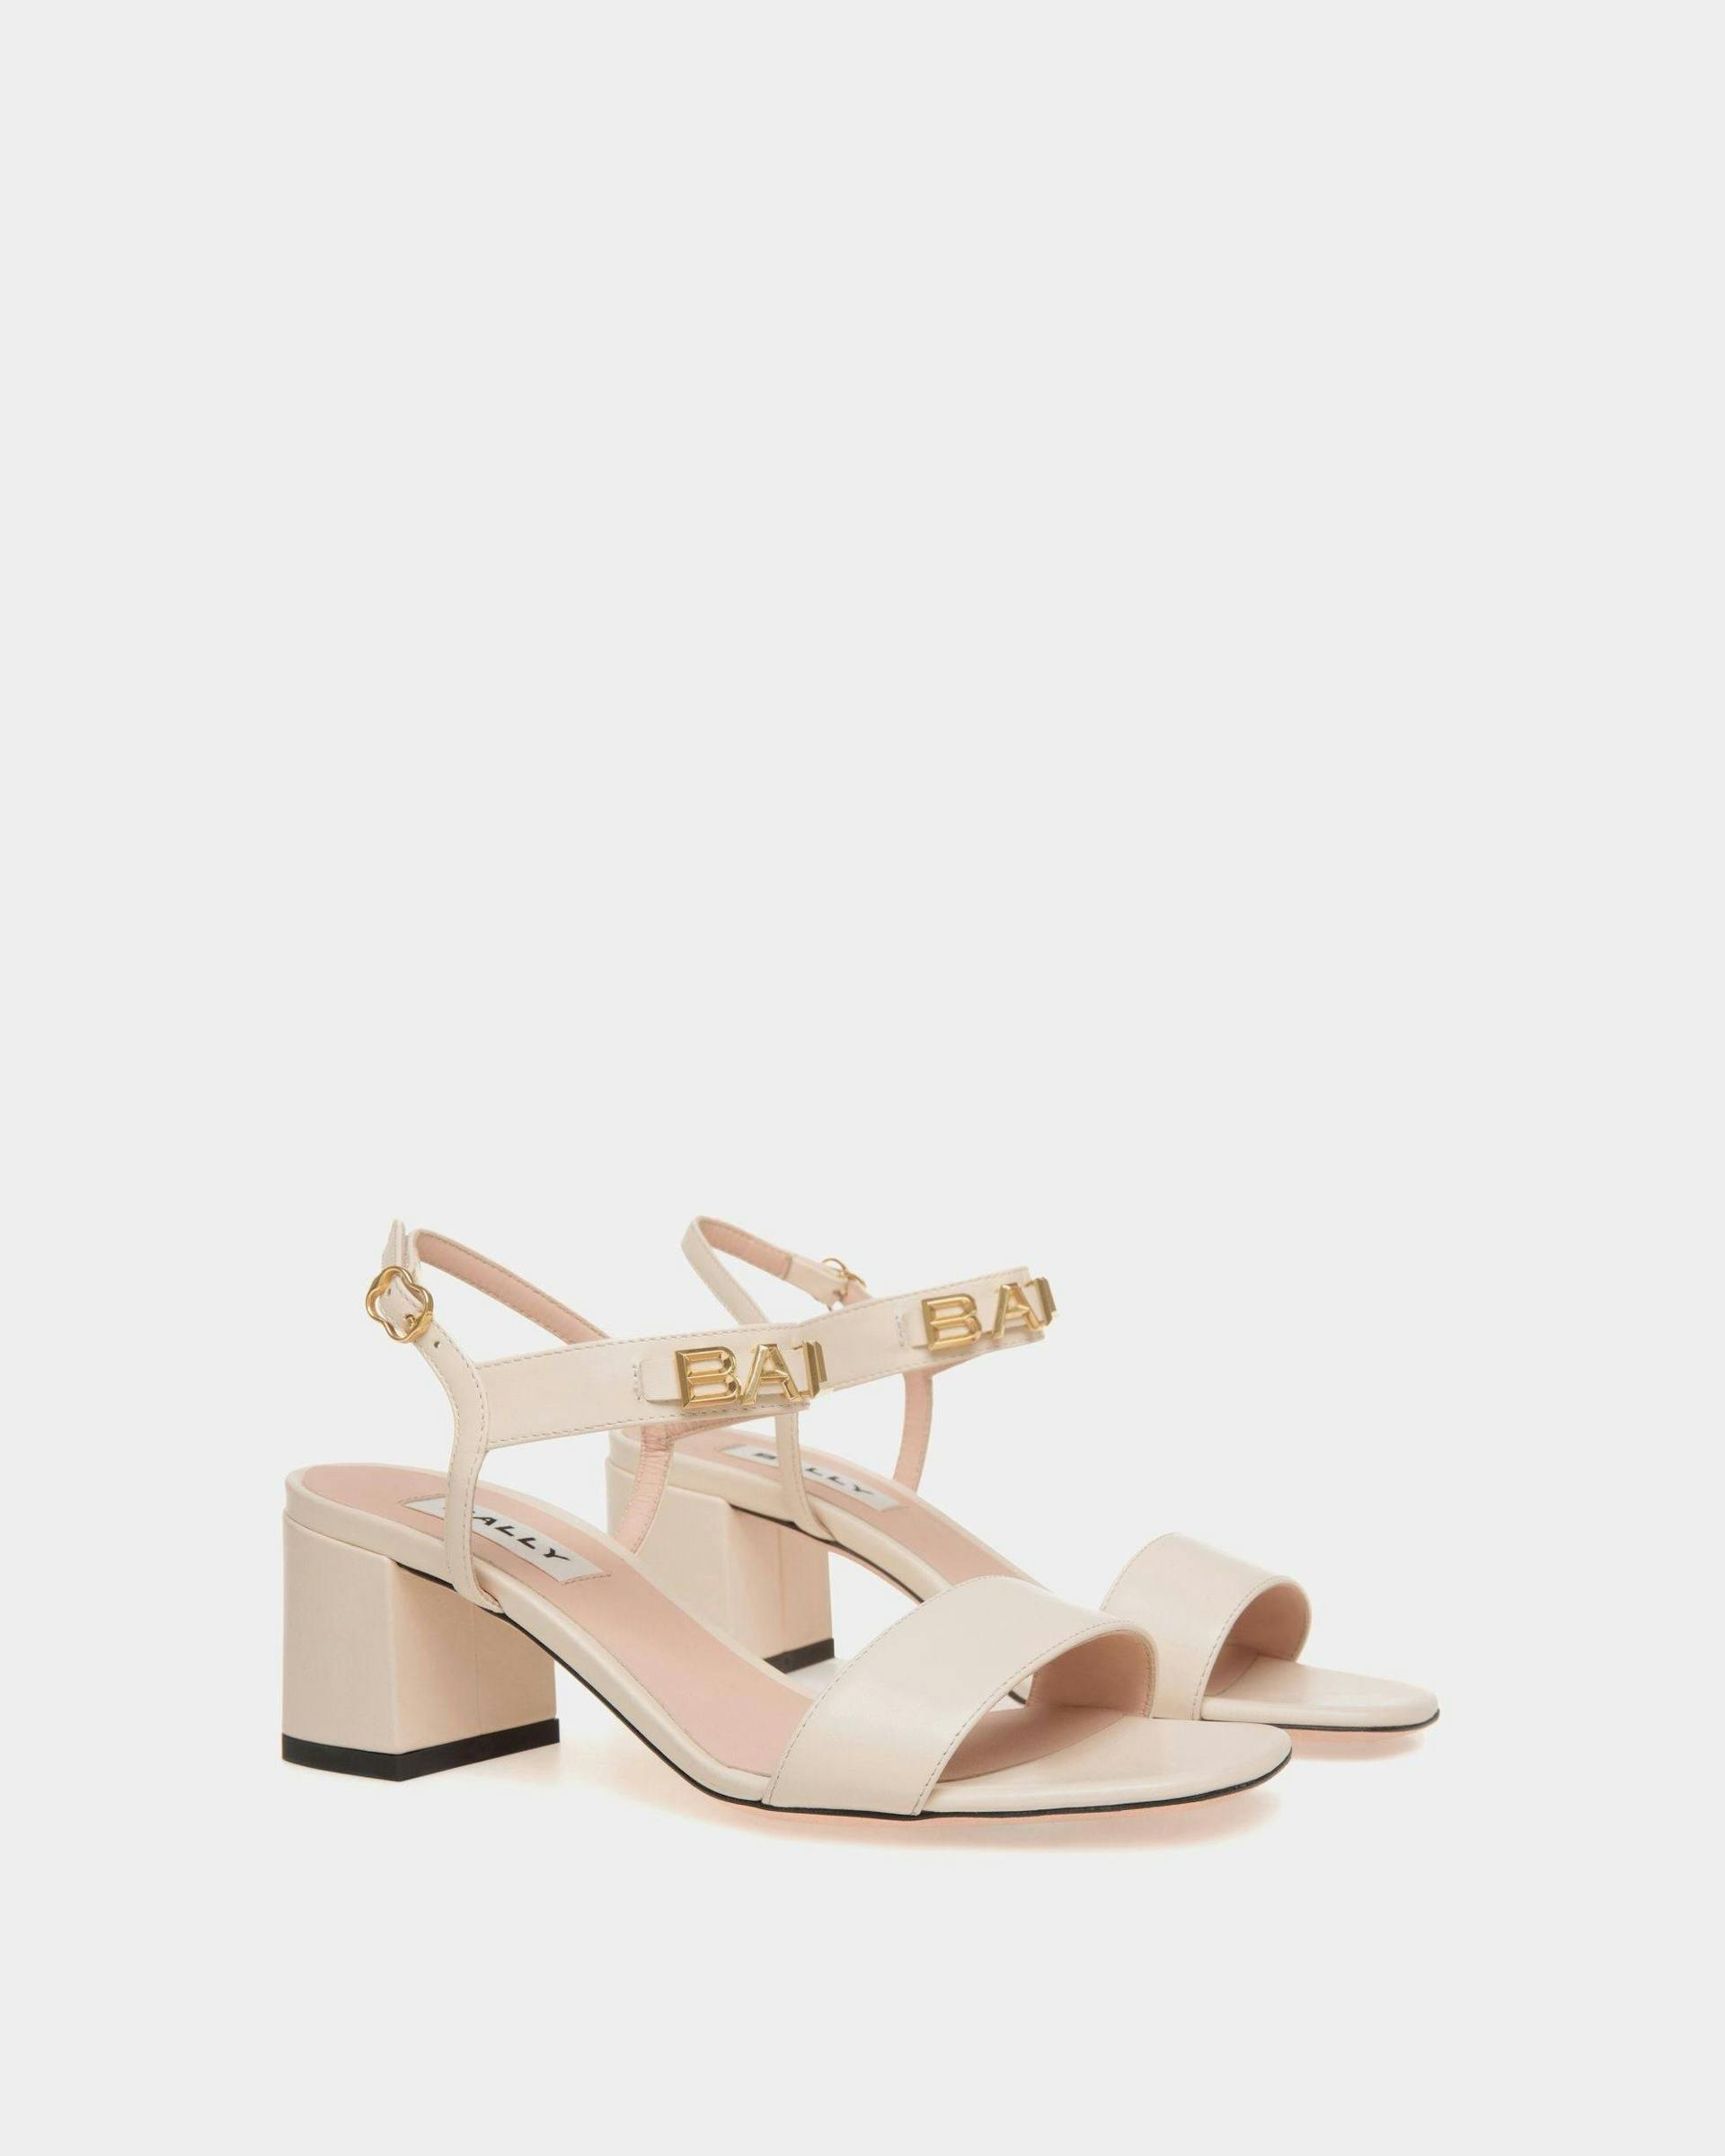 Women's Bally Spell Heeled Sandal in Leather | Bally | Still Life 3/4 Front